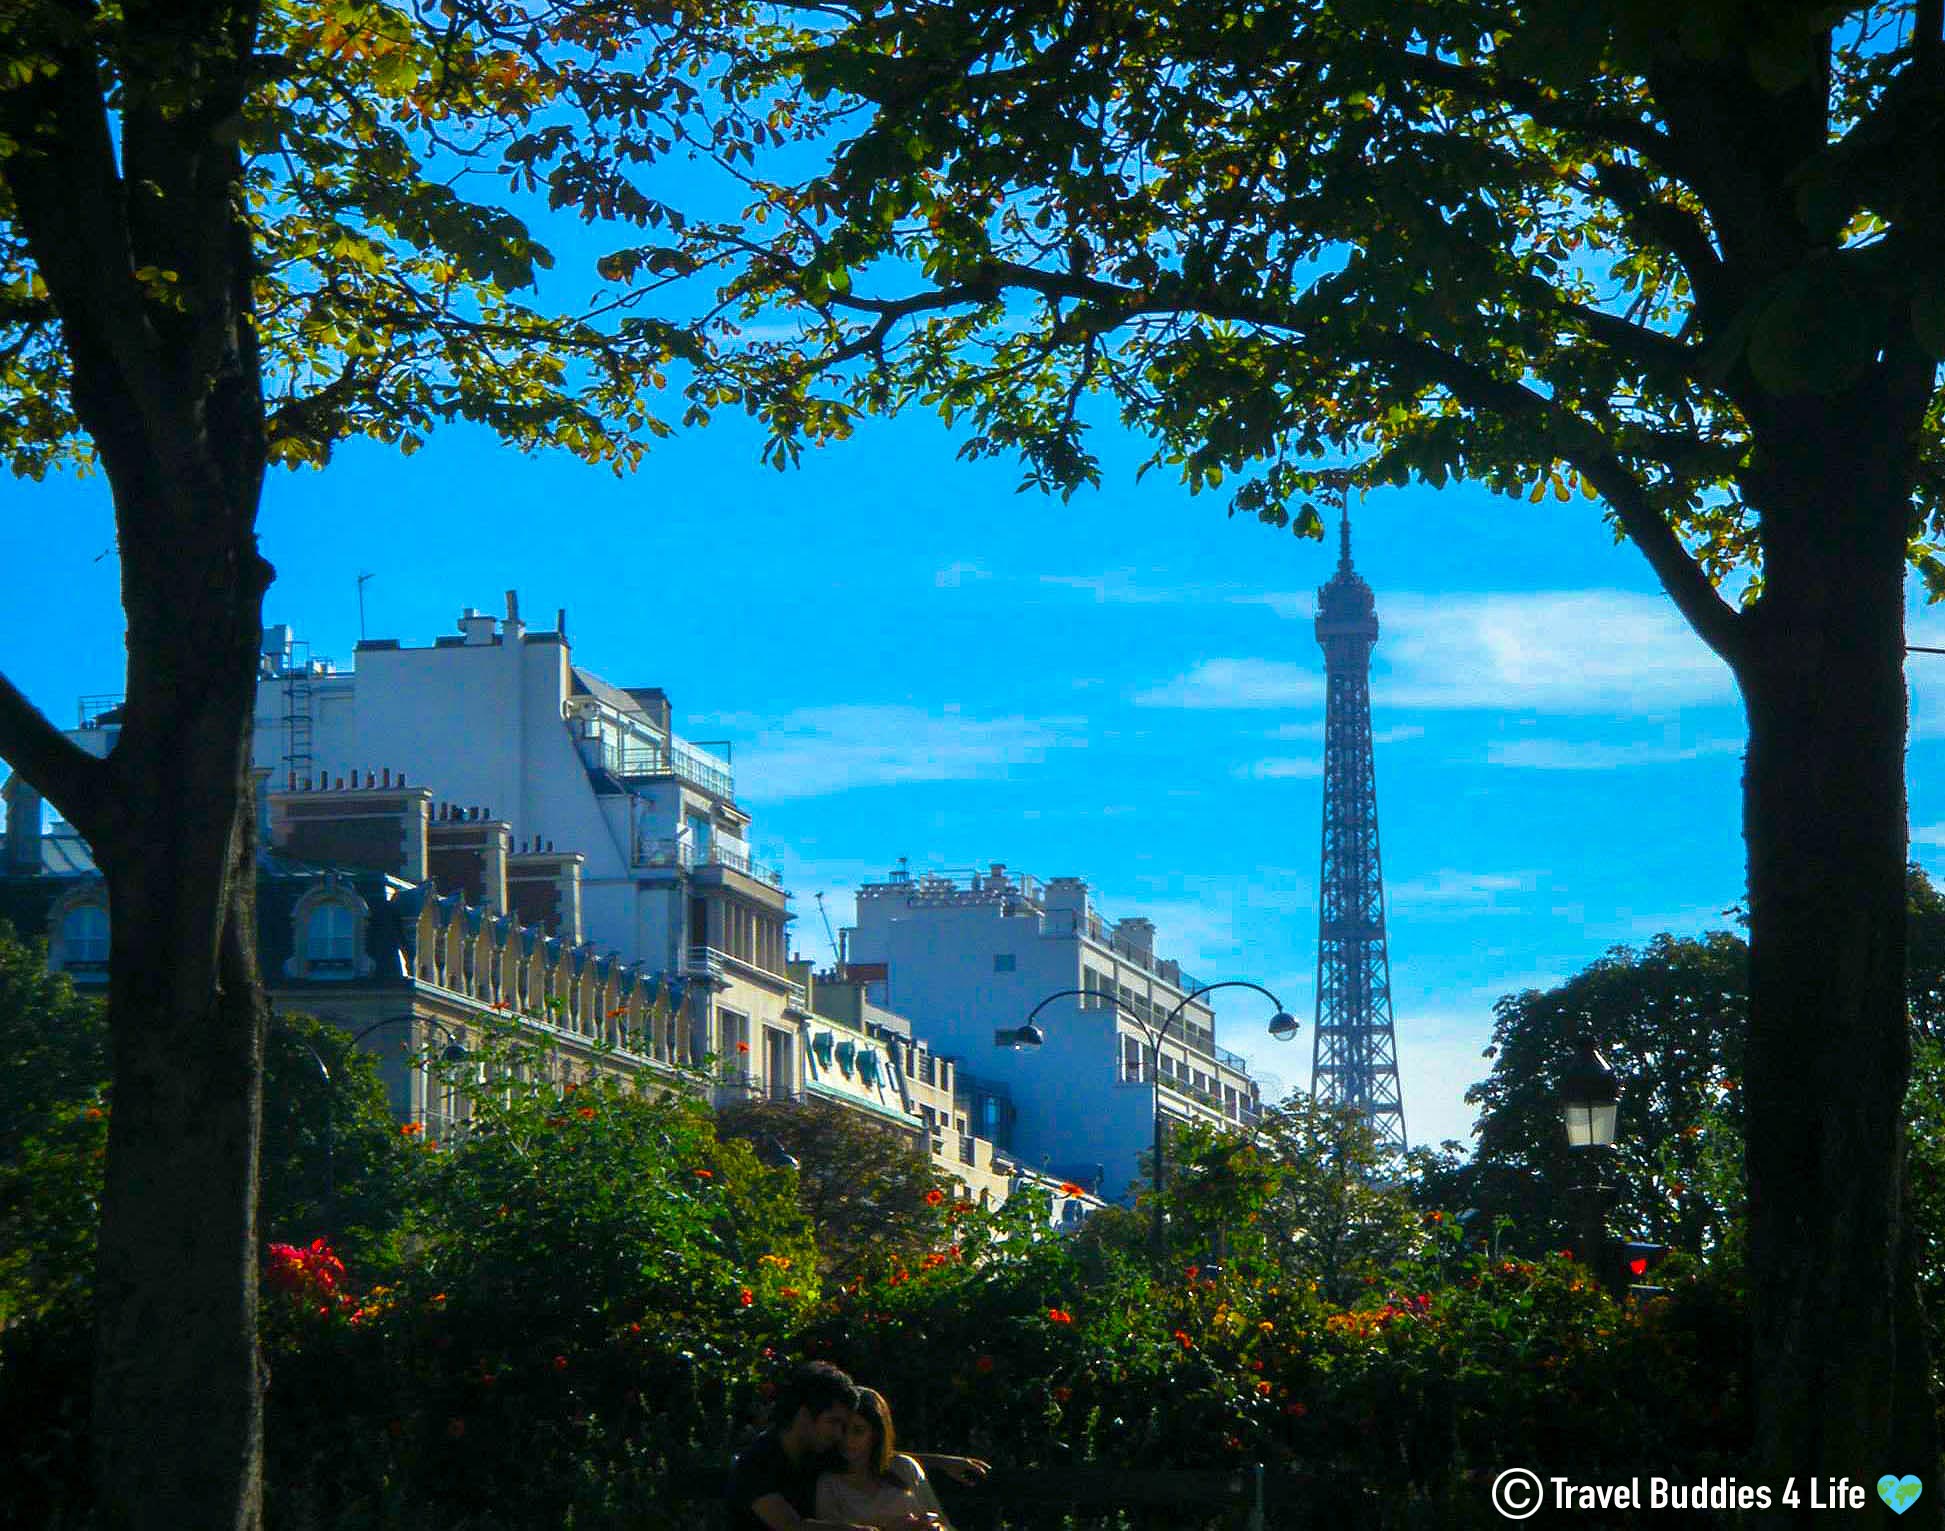 A Pair Of Lovers In Paris With The Eiffle Tower In The Distance, France, Europe